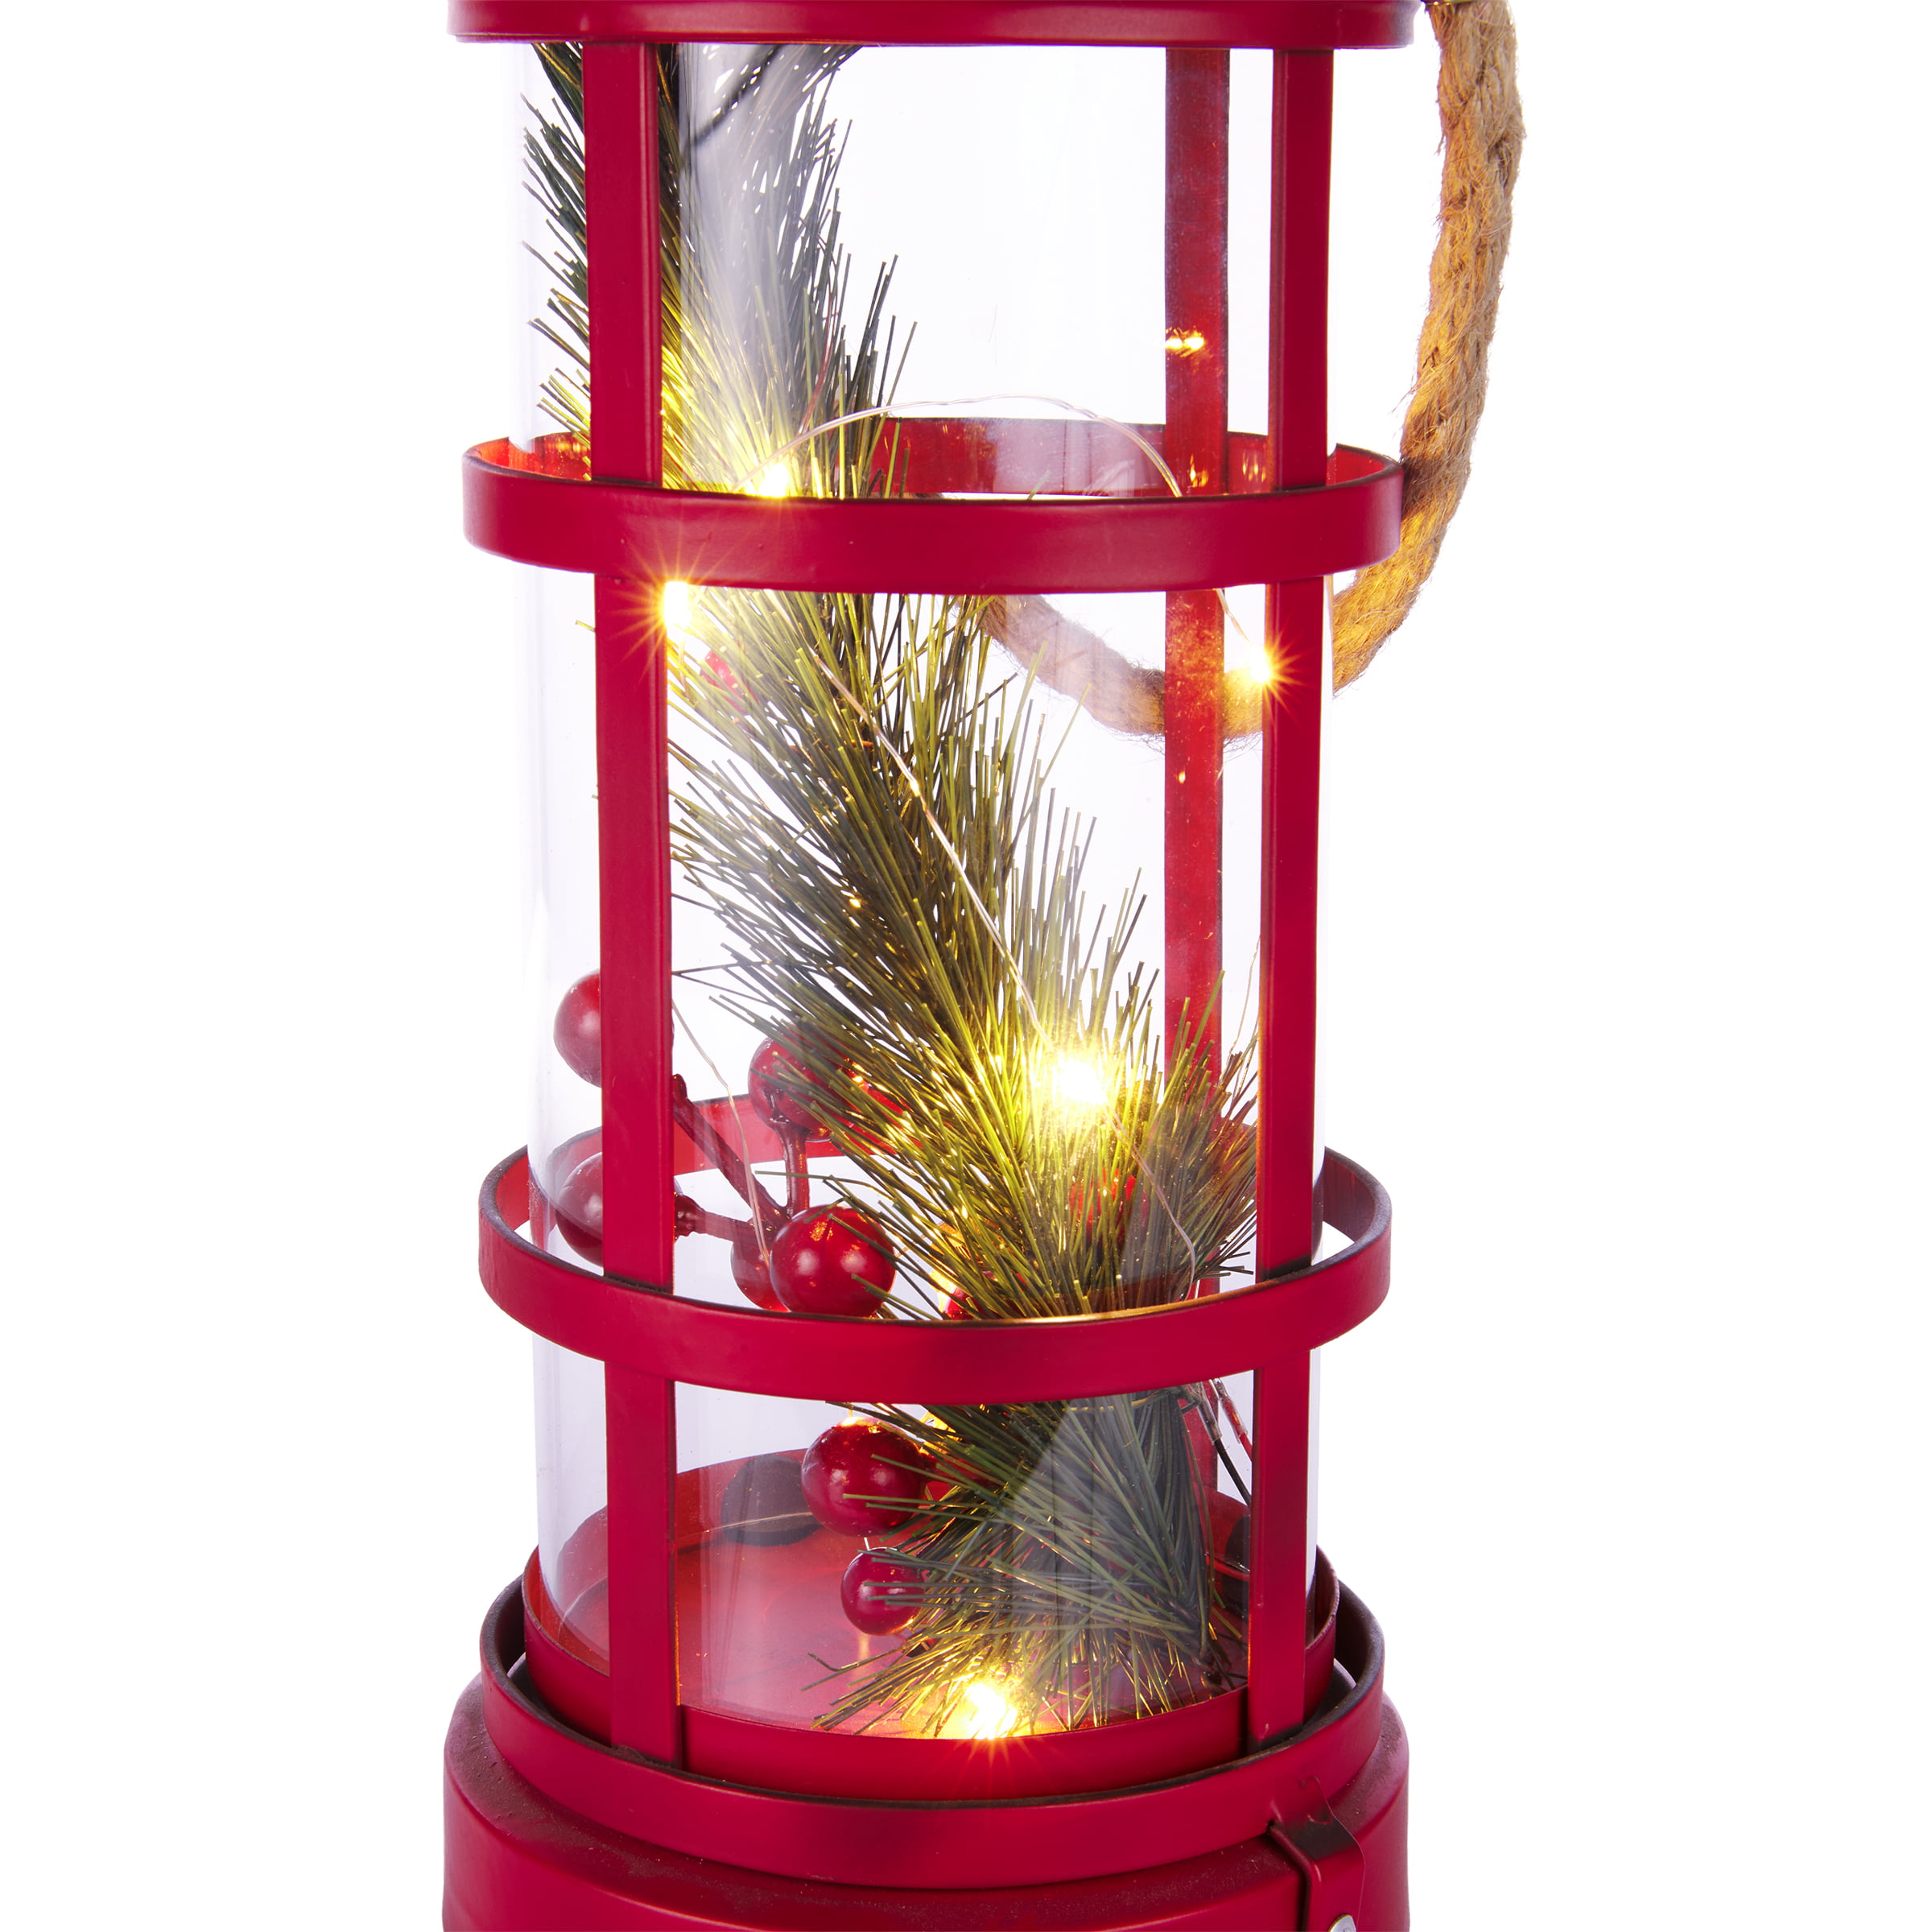 Alpine Corporation 15 in. H Indoor/Outdoor Vintage Metal Lantern with LED  Lights in Silver OAB140HH-S-SL - The Home Depot